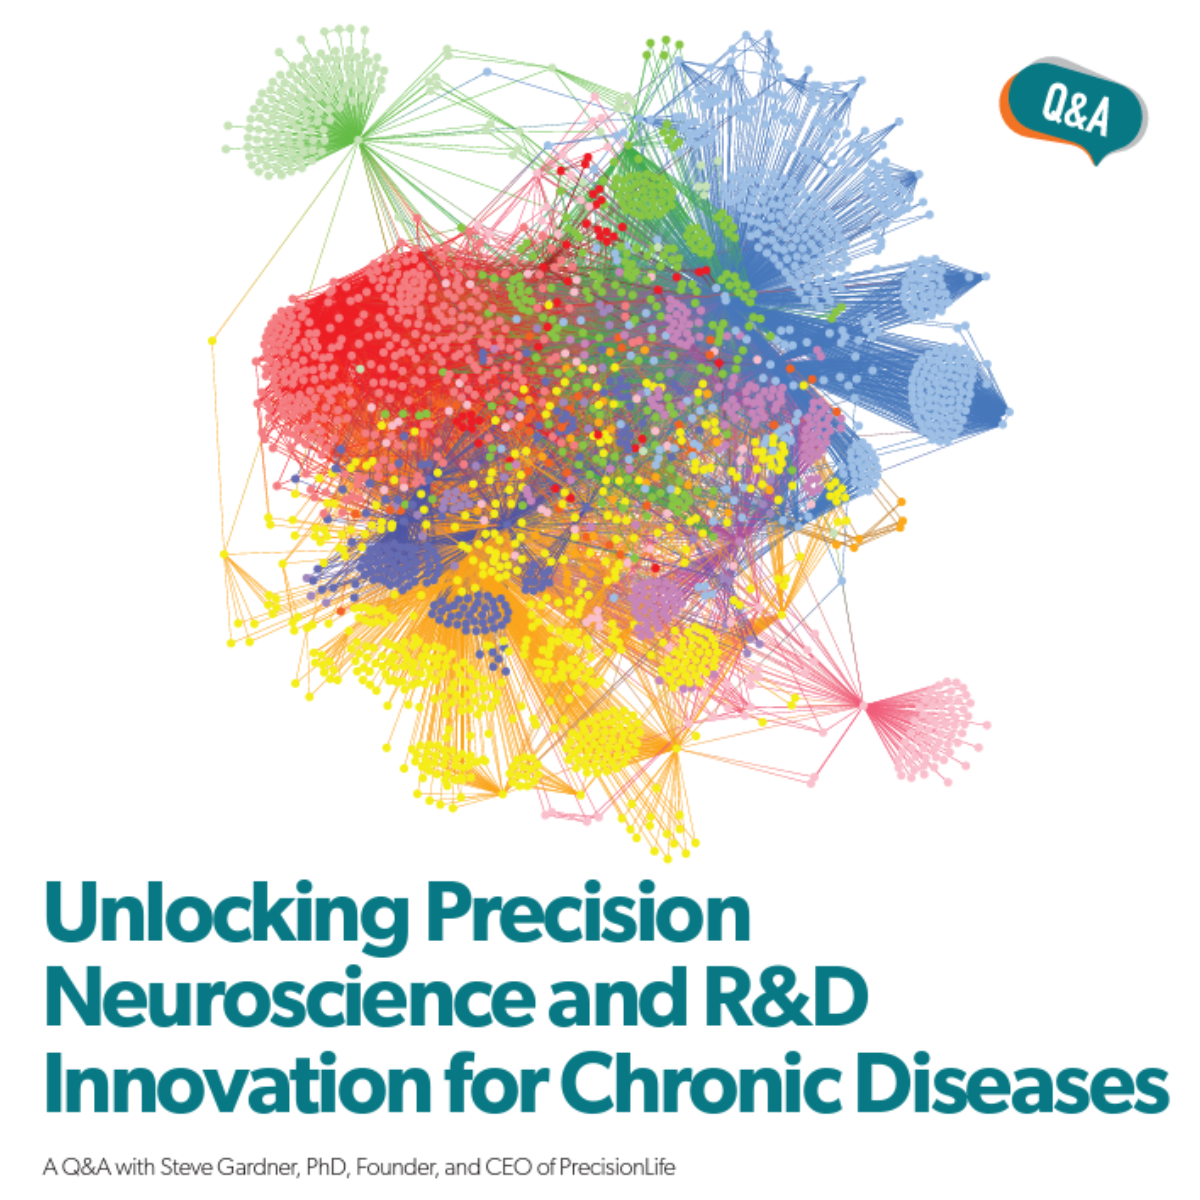 Unlocking Precision Neuroscience and R&D Innovation for Chronic Diseases